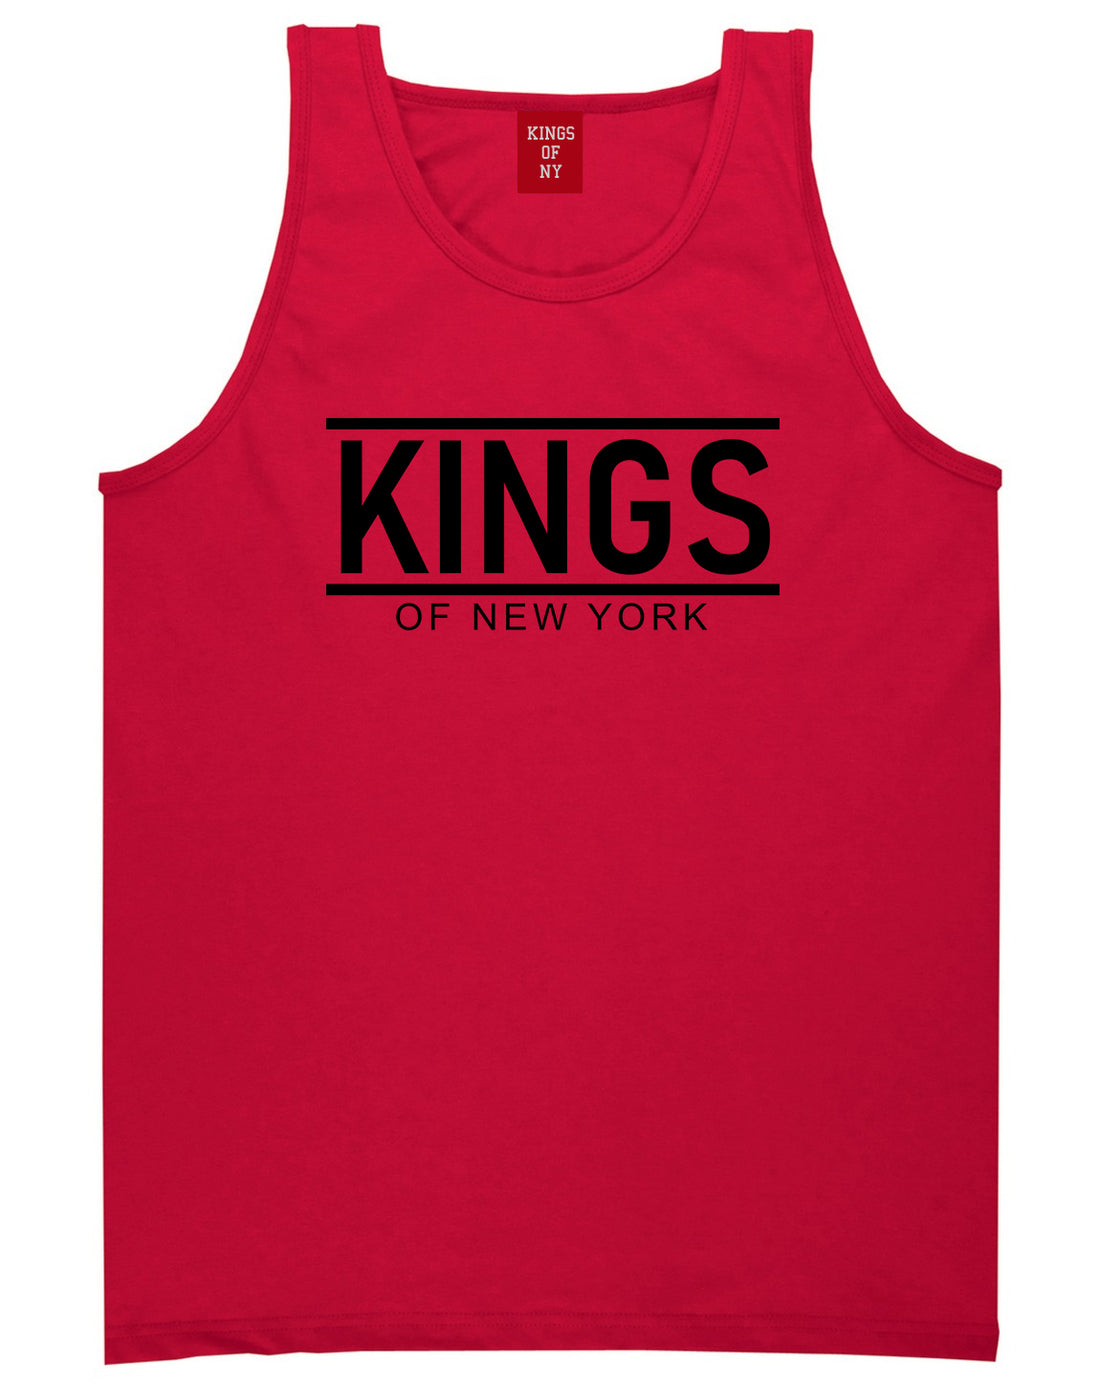 KINGS Of New York Lines Mens Tank Top T-Shirt Red